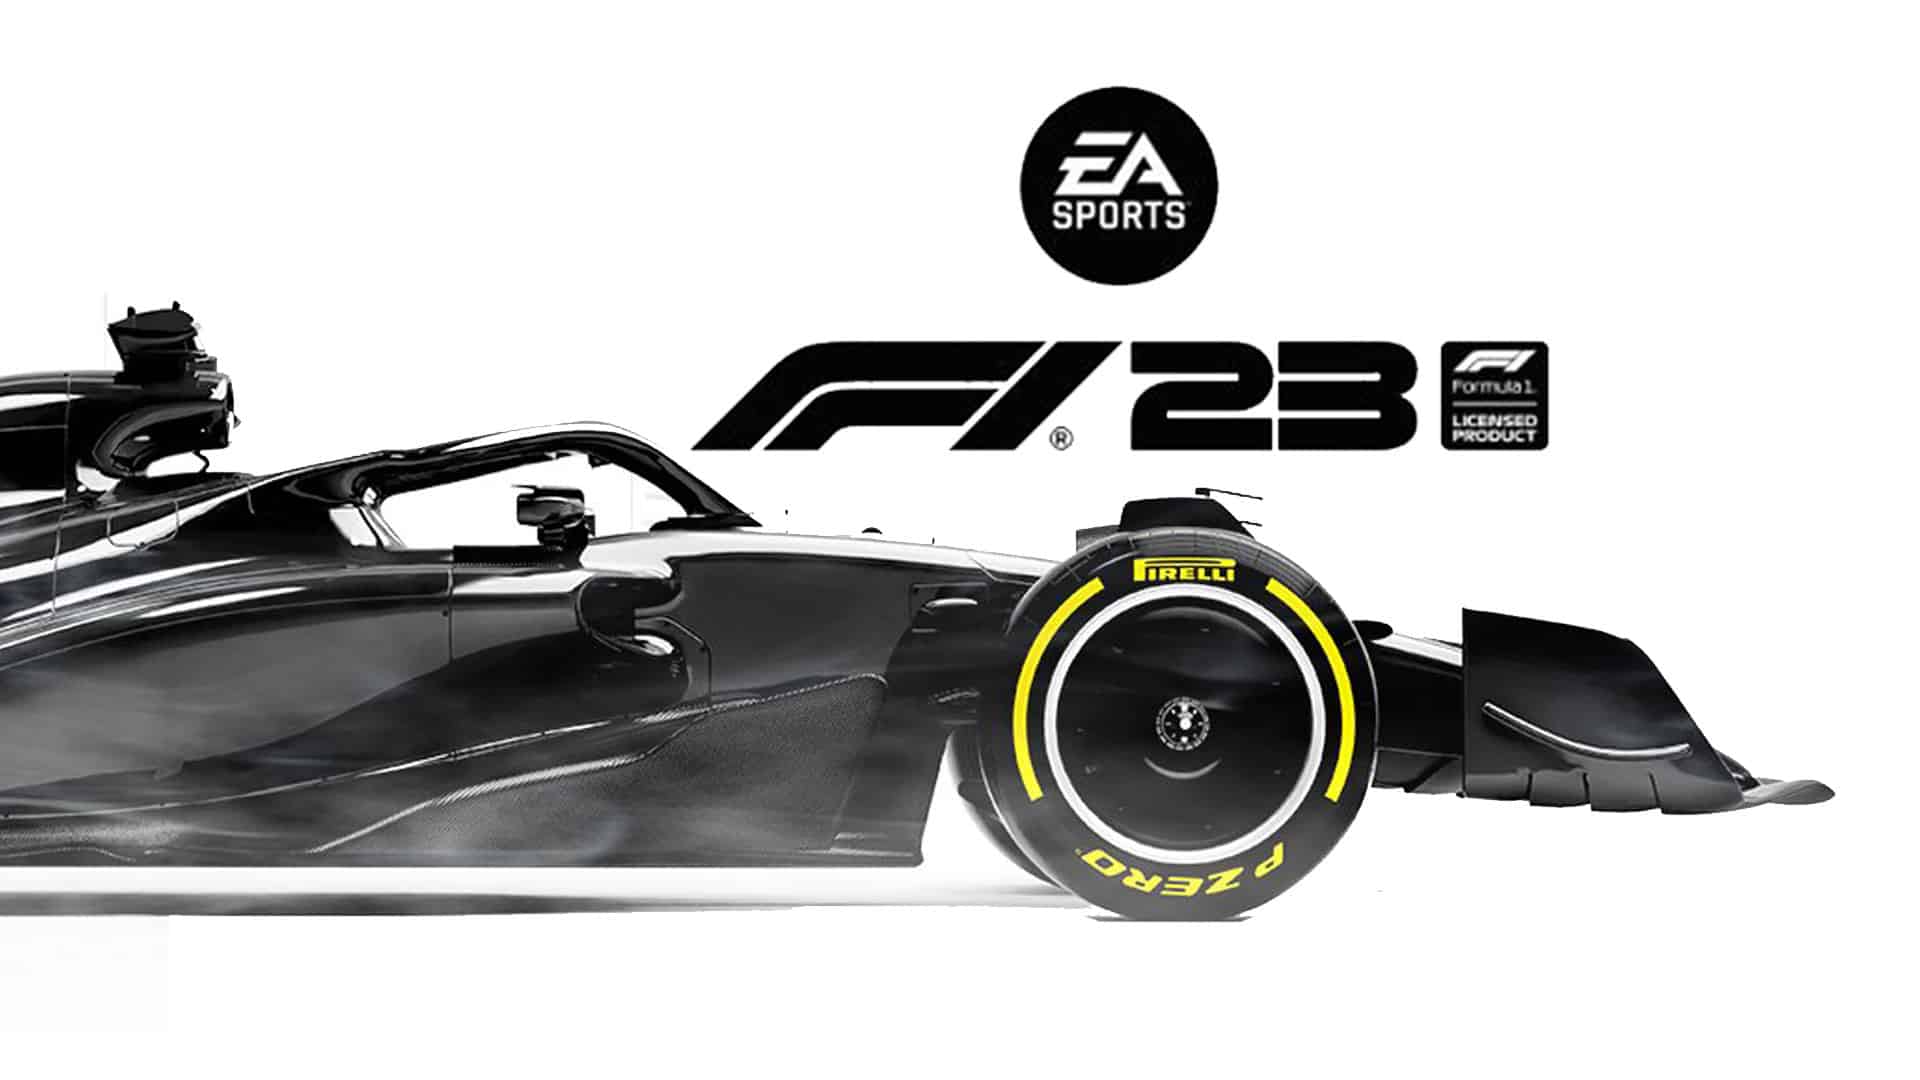 Is F1 23 on Game Pass and EA Play?